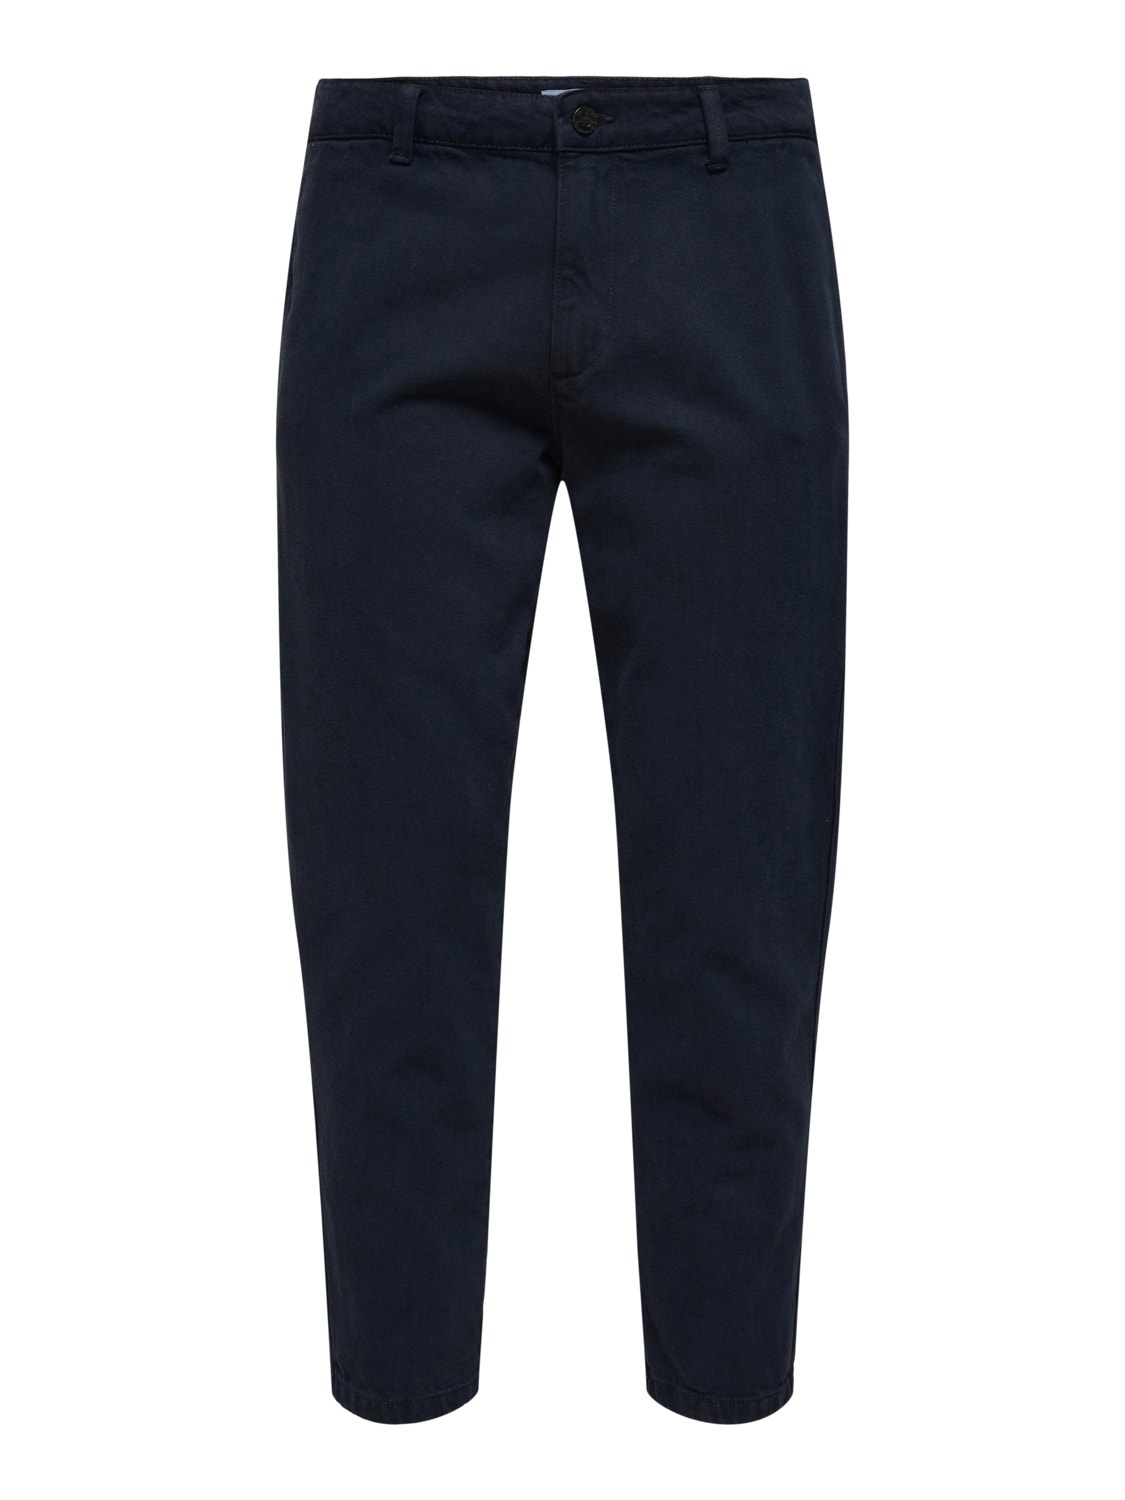 ONLY & SONS Verjüngt Mittlere Taille Chino Hose -Night Sky - 22023286